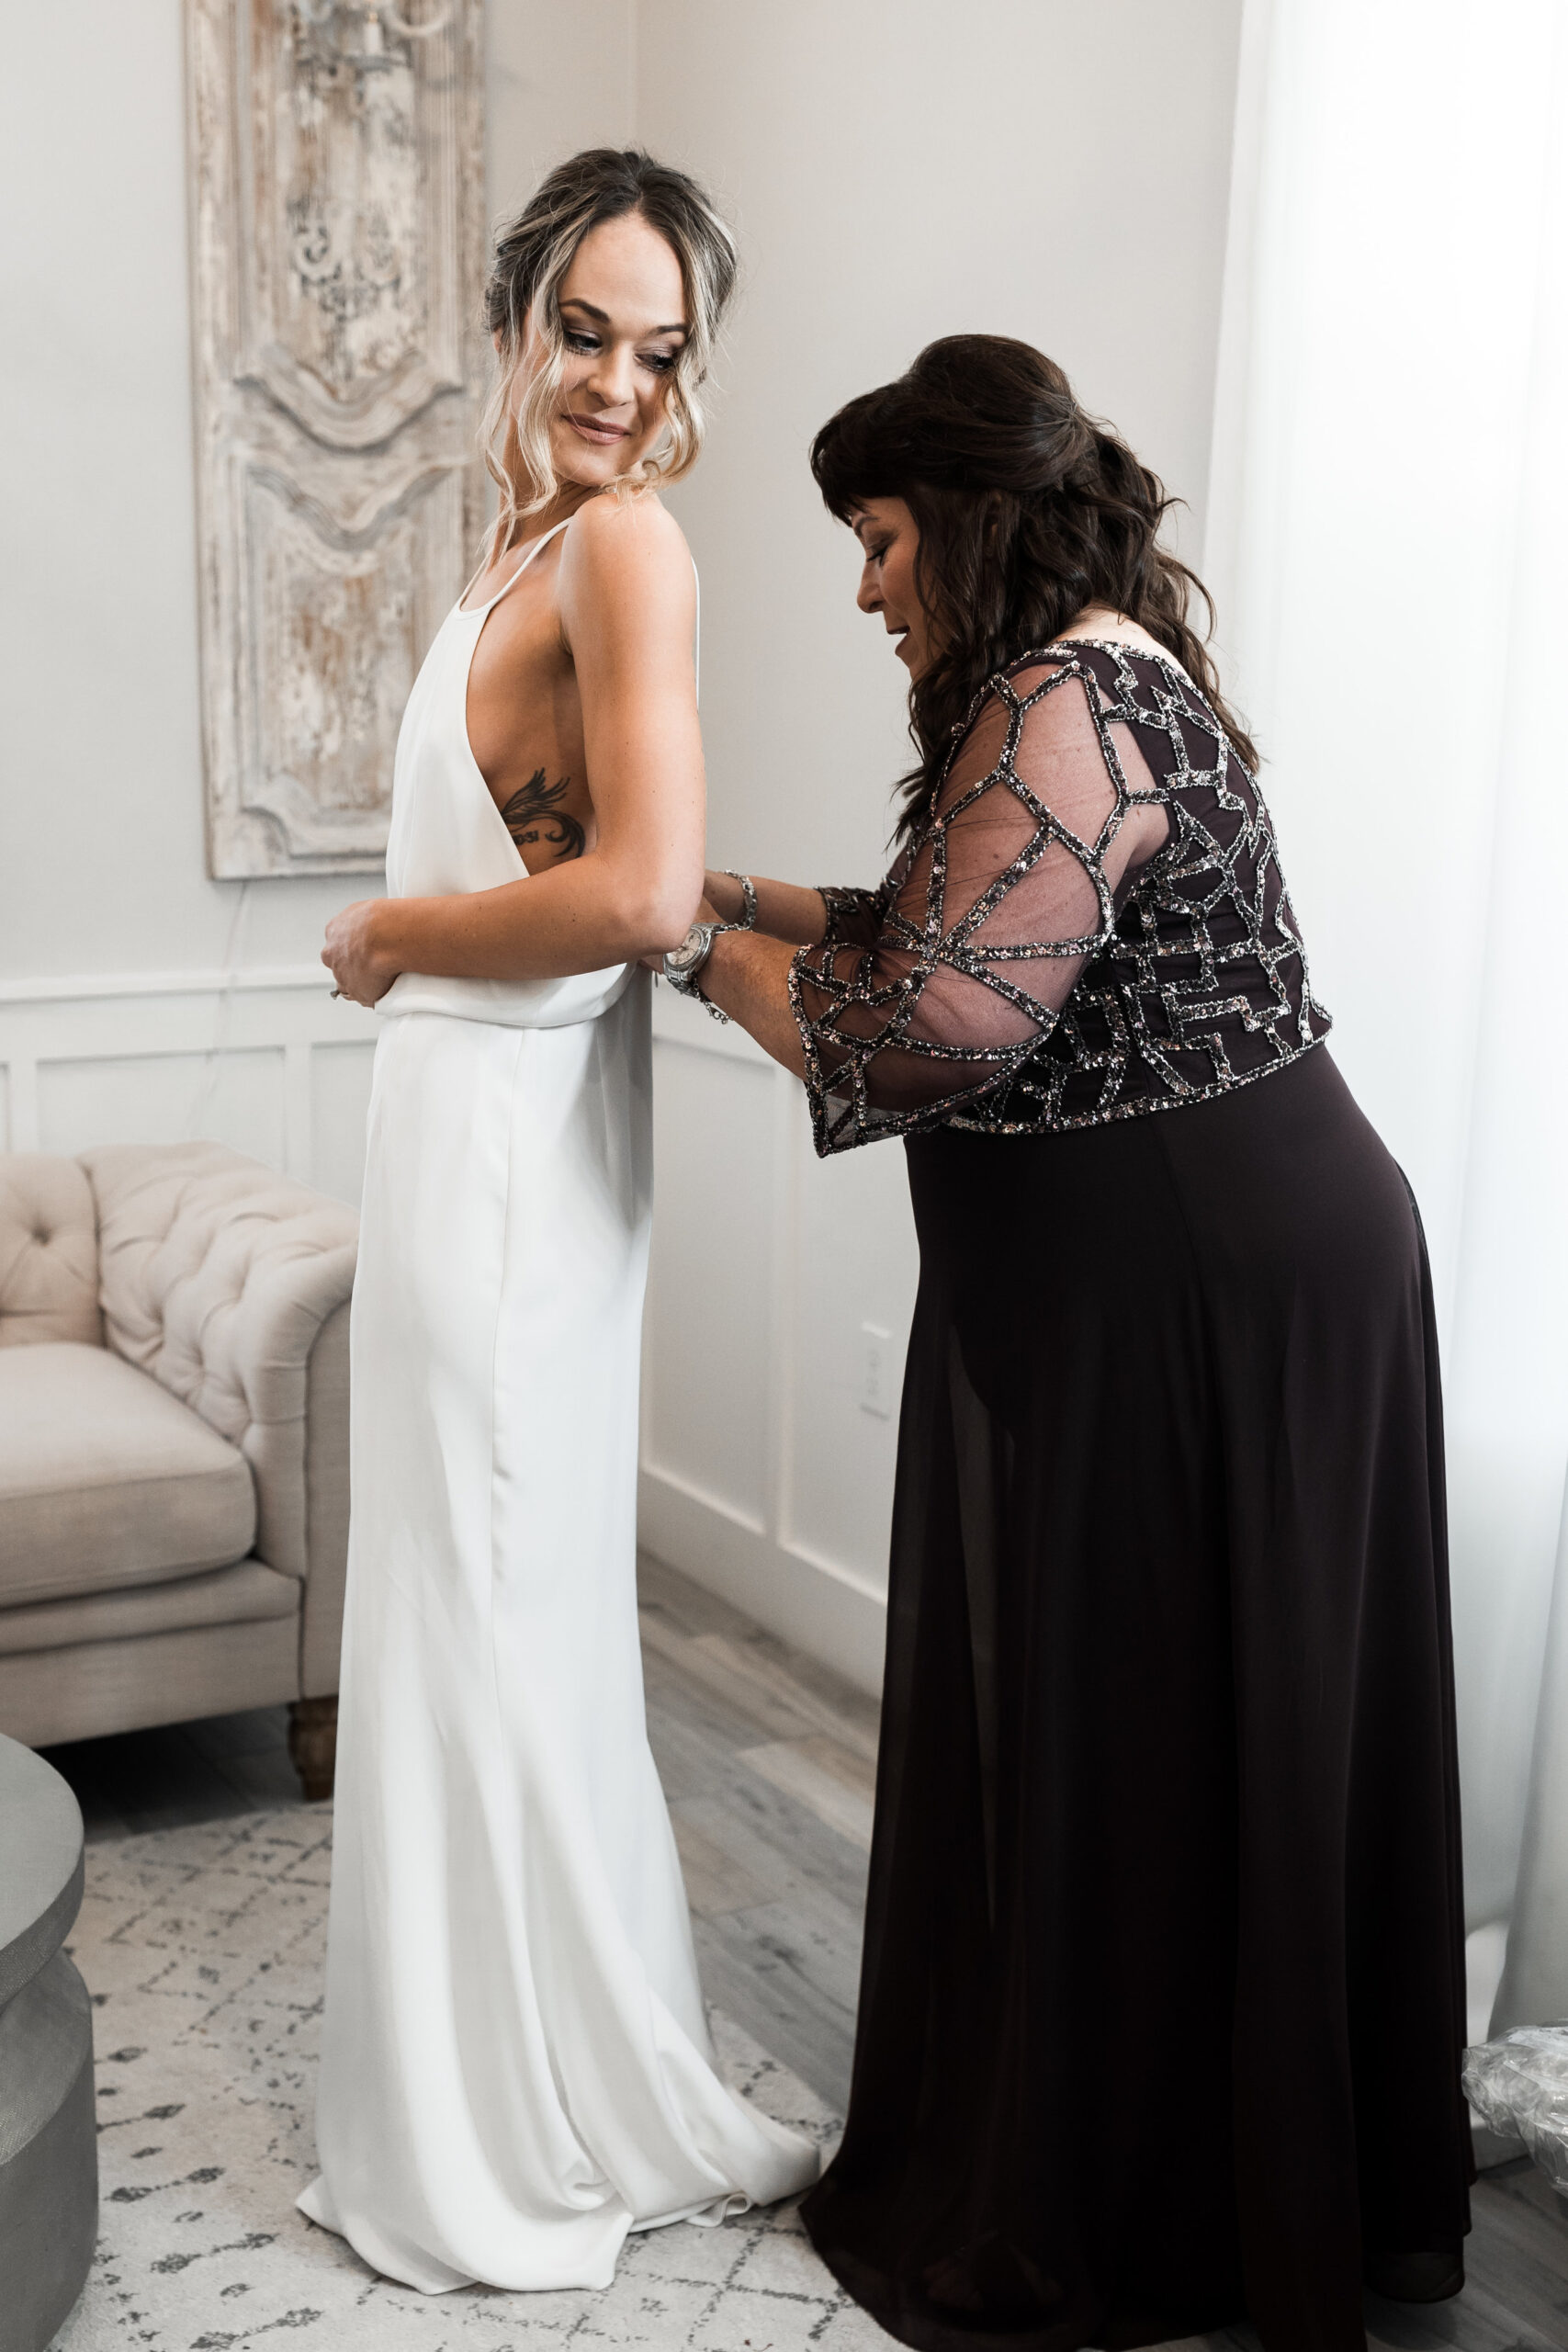 Old Bethany Weddings and Events | Between the Pine Photography beselwedding-104.jpg